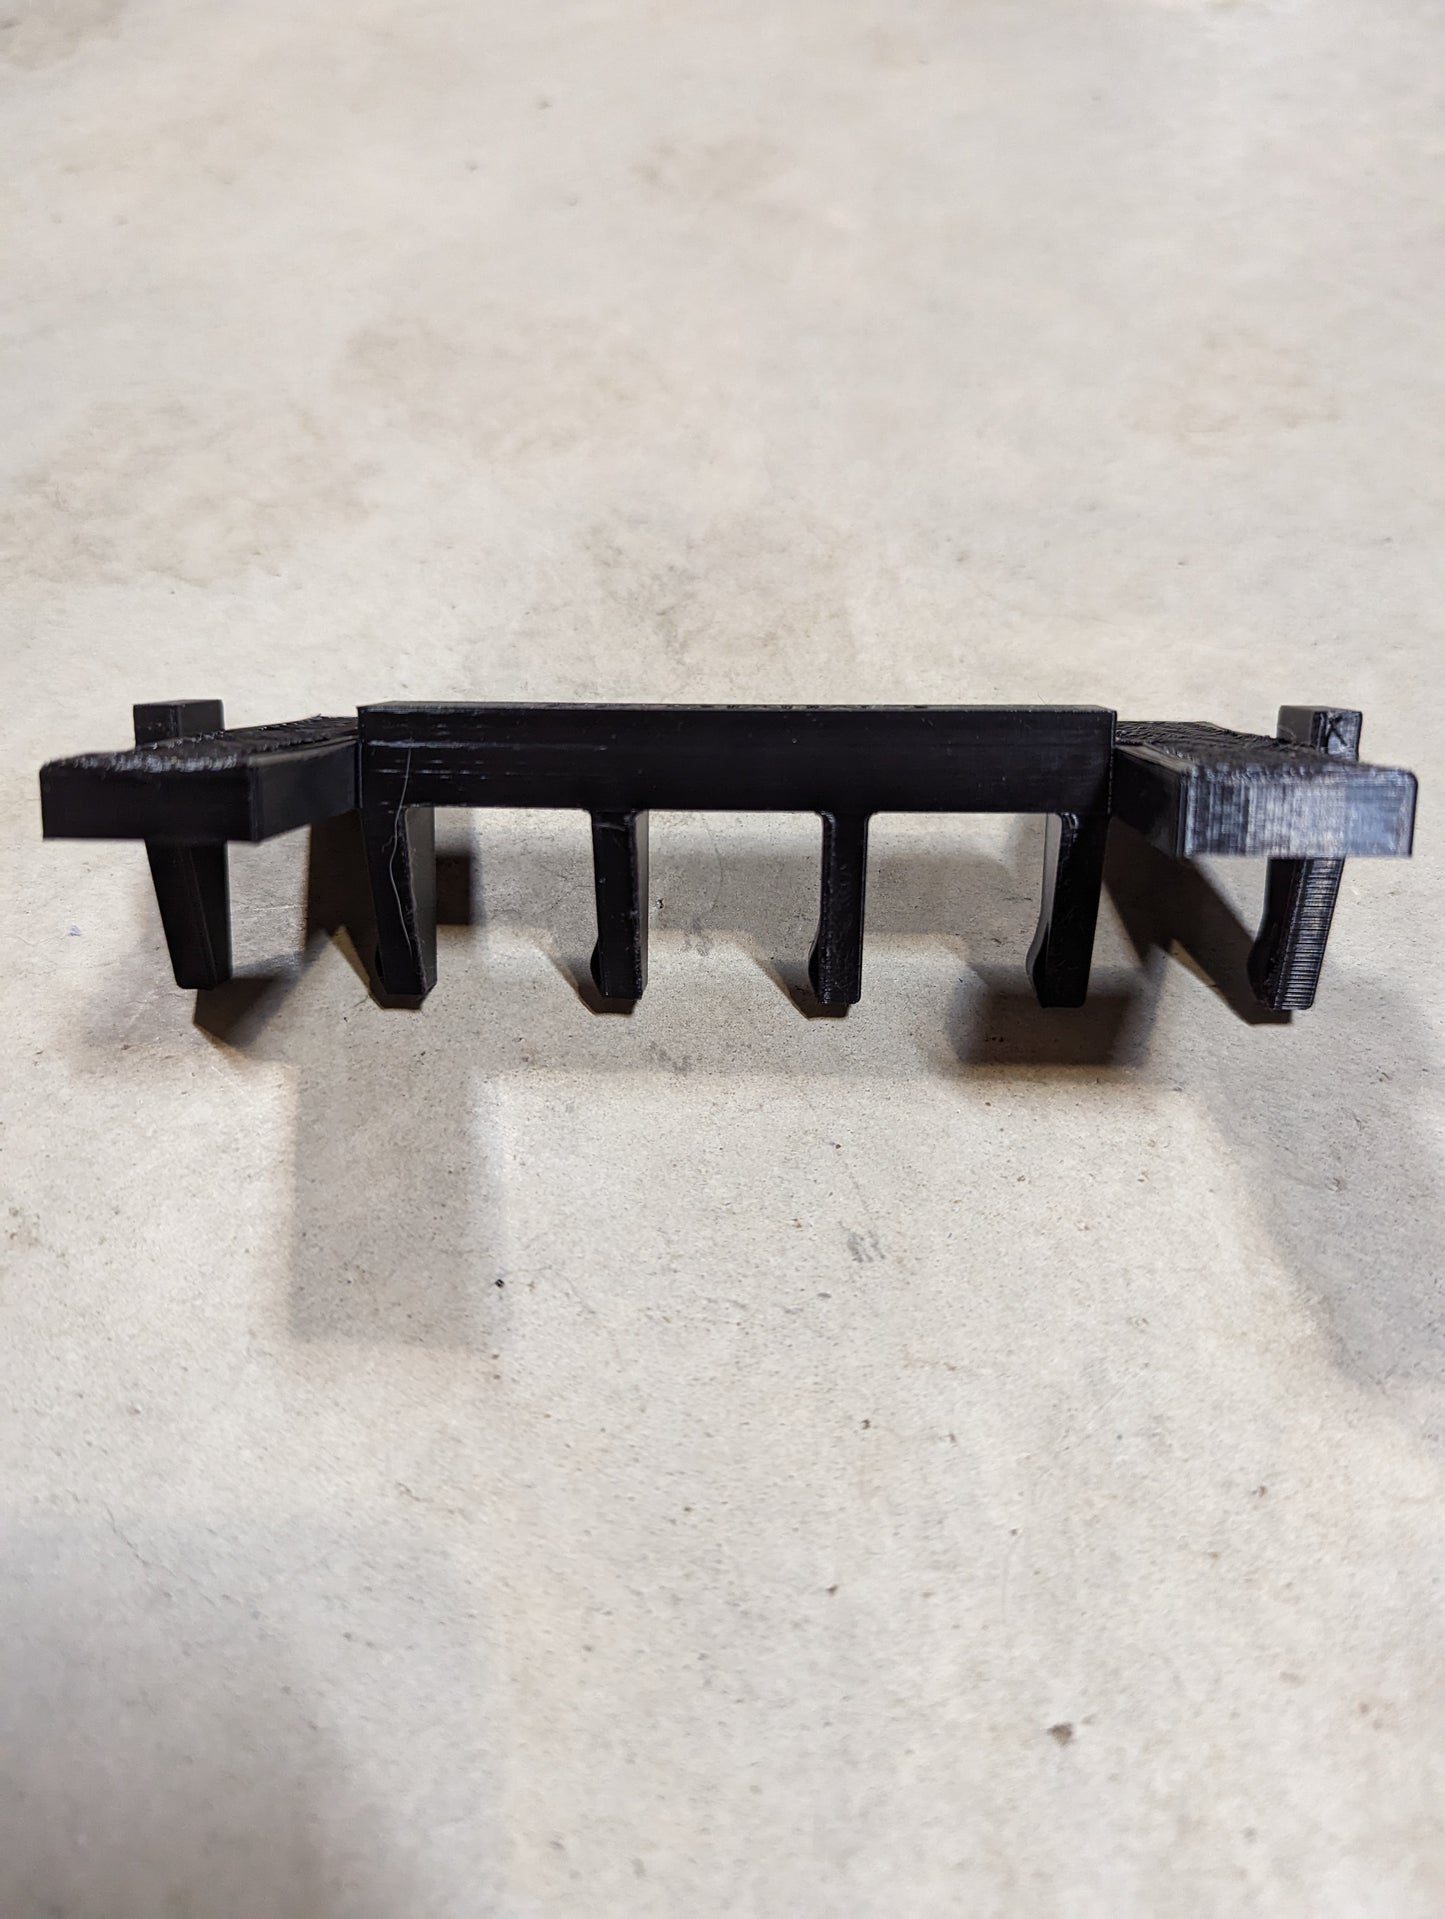 Mount for AR 15 Pattern Mags - Command Strips | Magazine Holder Storage Rack